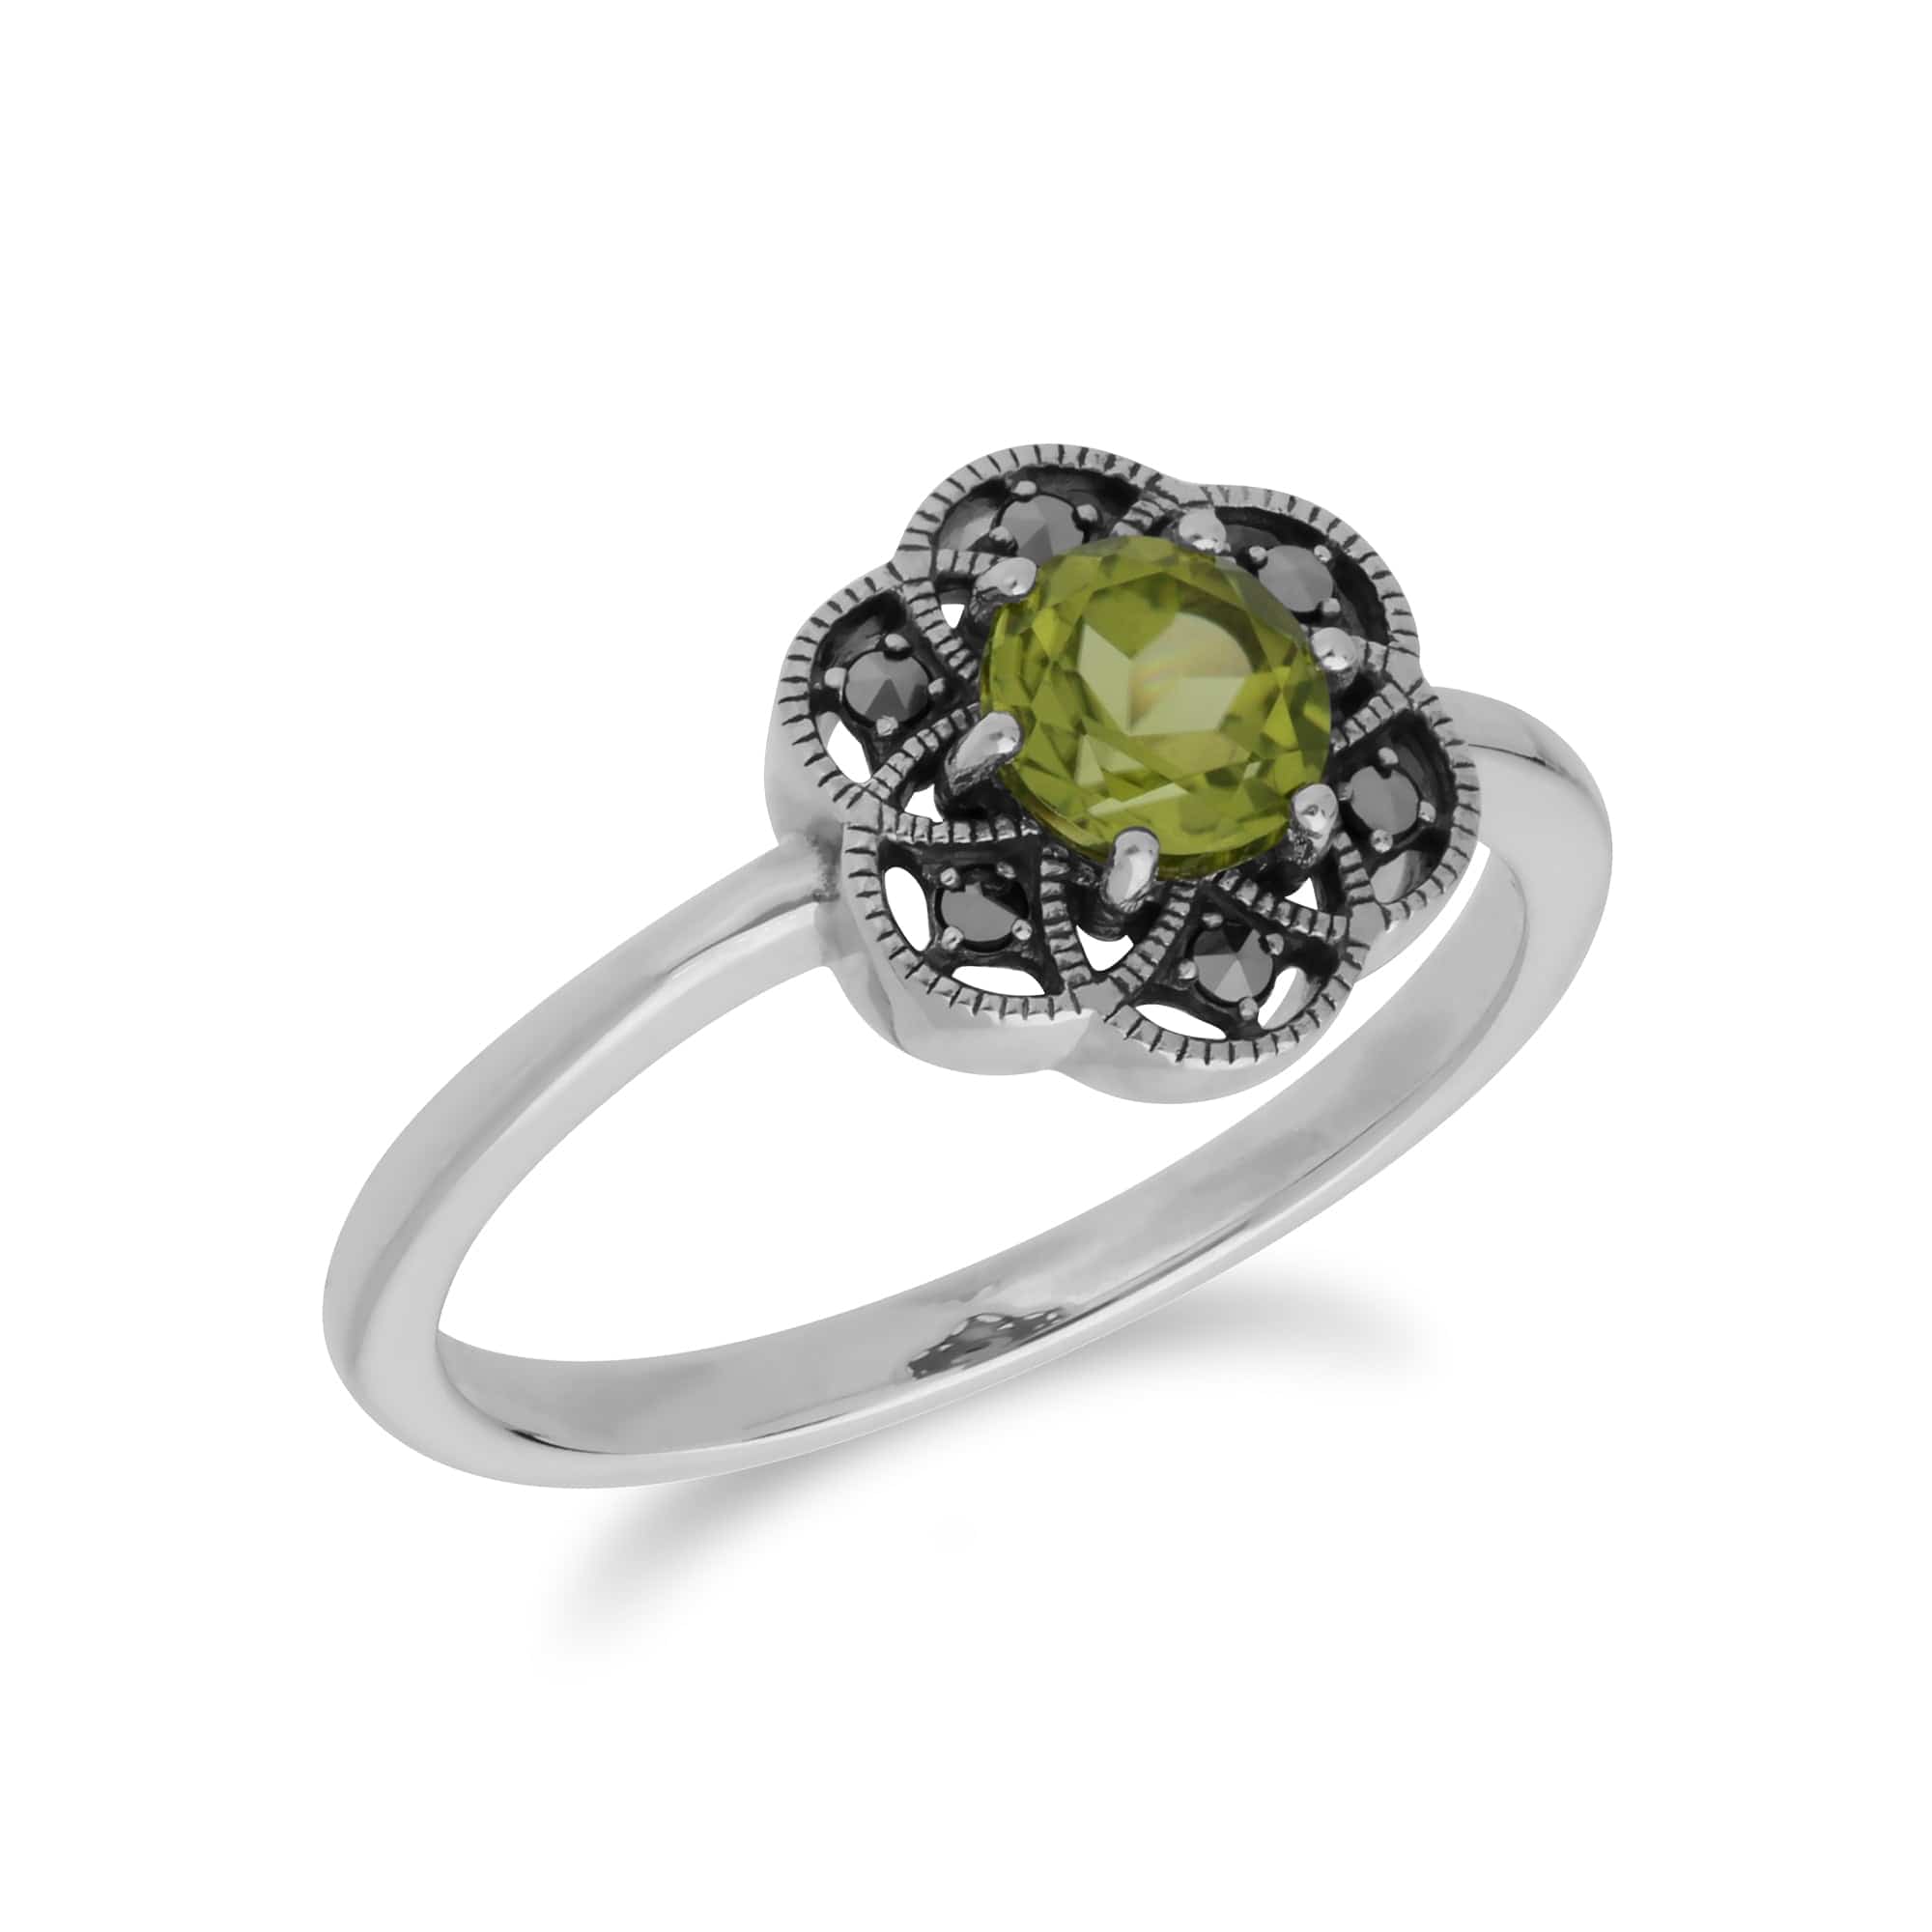 Floral Round Peridot & Marcasite Daisy Ring in 925 Sterling Silver - Gemondo